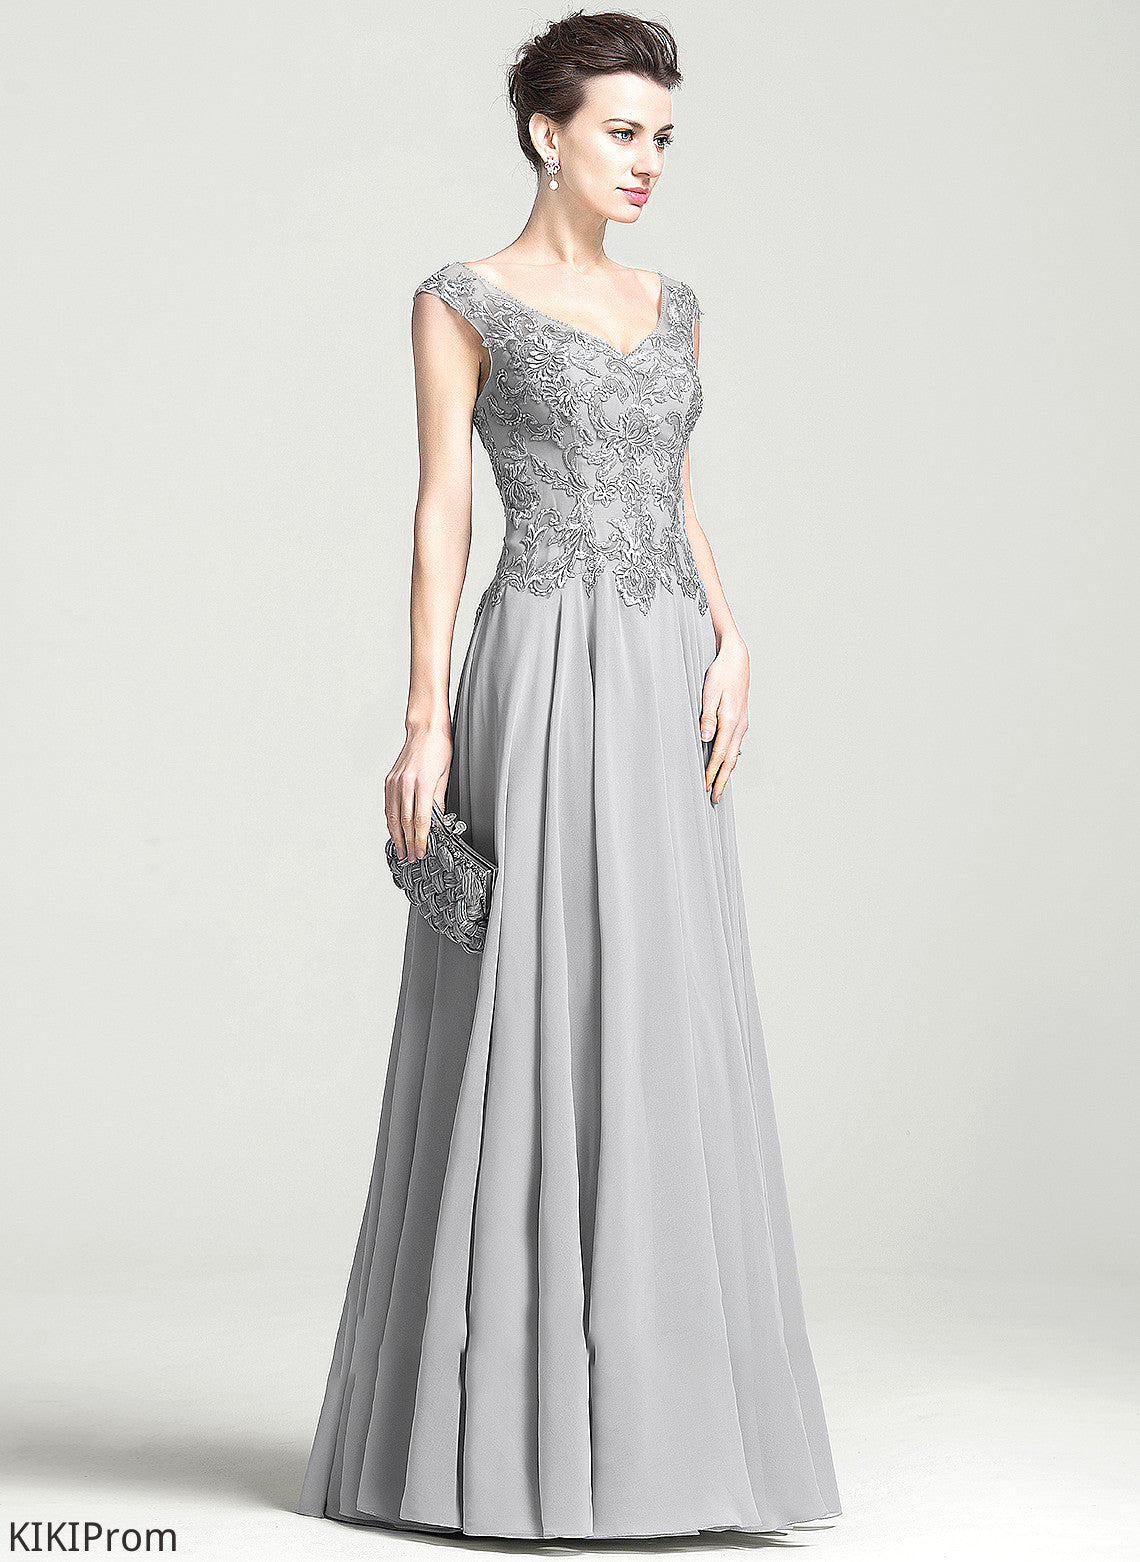 the V-neck Lace Chiffon A-Line Dress Mother of the Bride Dresses of Appliques Floor-Length With Yamilet Mother Bride